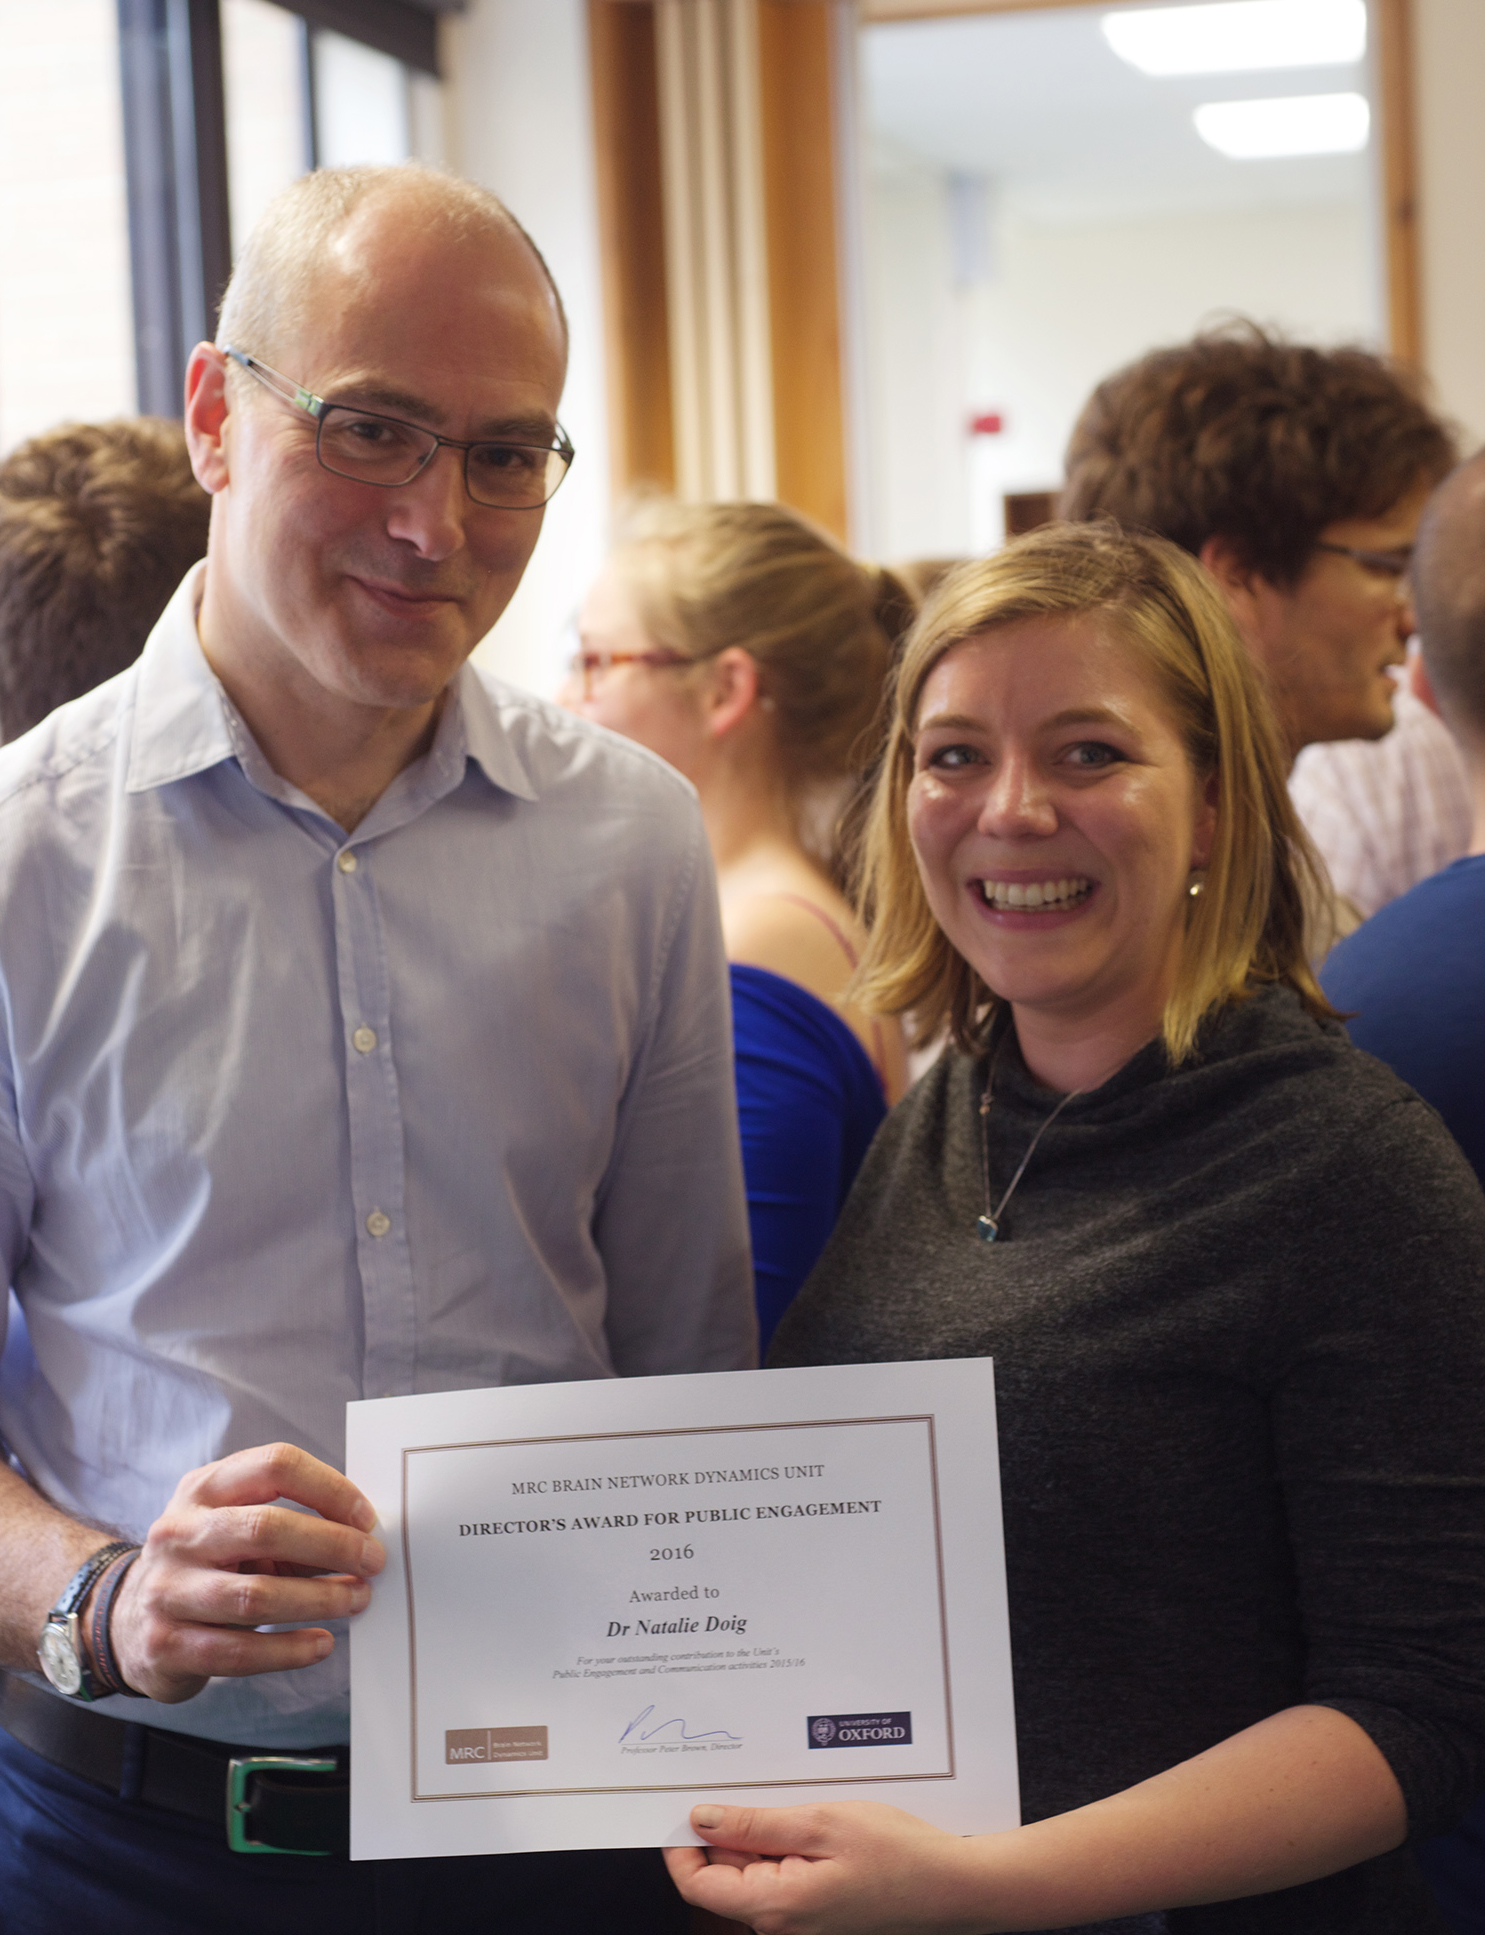 Professor Peter Brown, Unit Director, with Dr Natalie Doig, winner of the 2016 Director’s Award for Public Engagement.